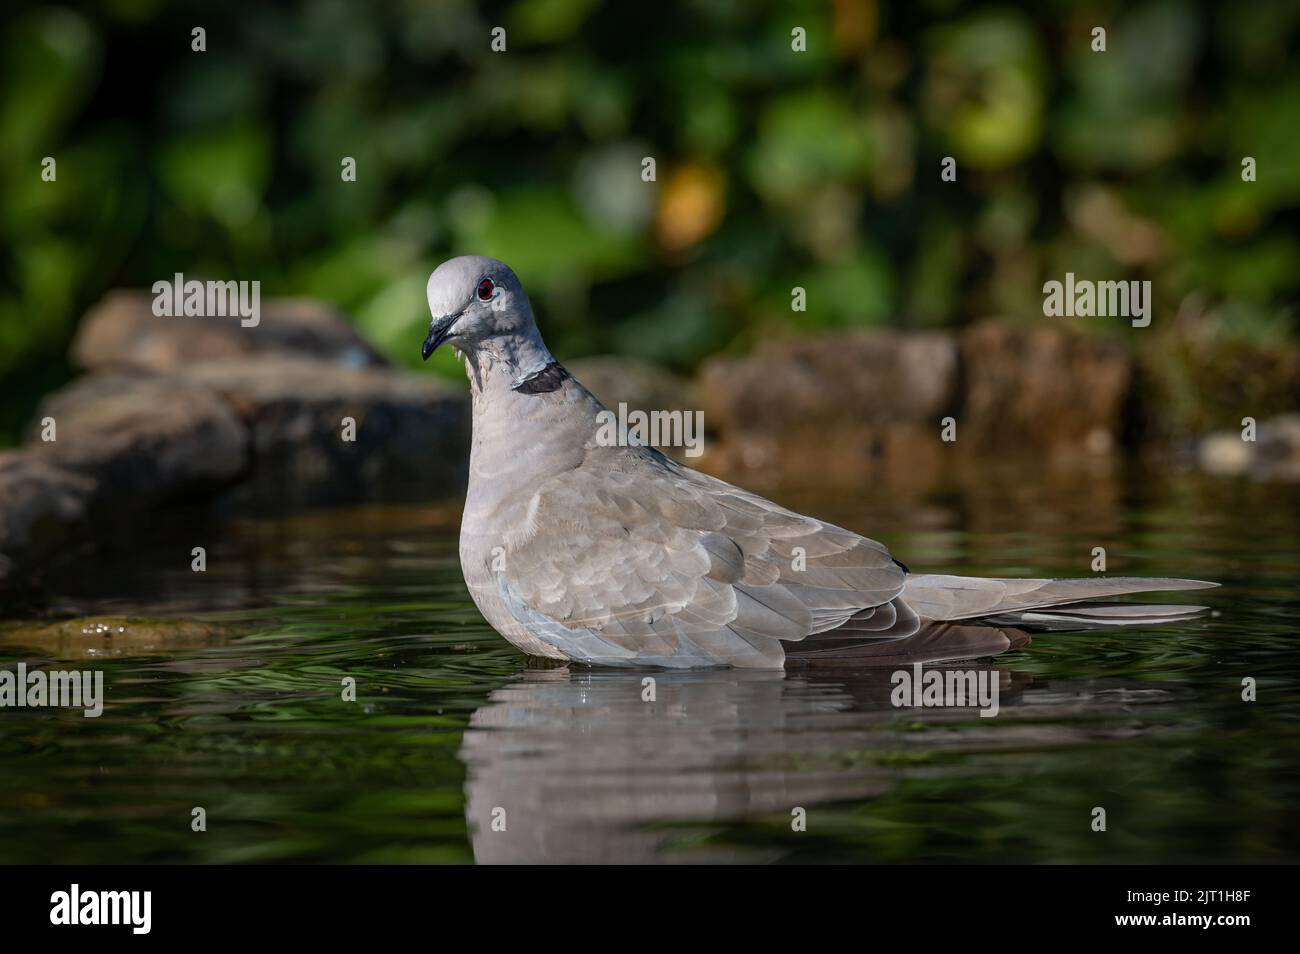 Collared Dove in water bathing with reflection facing the camera Stock Photo